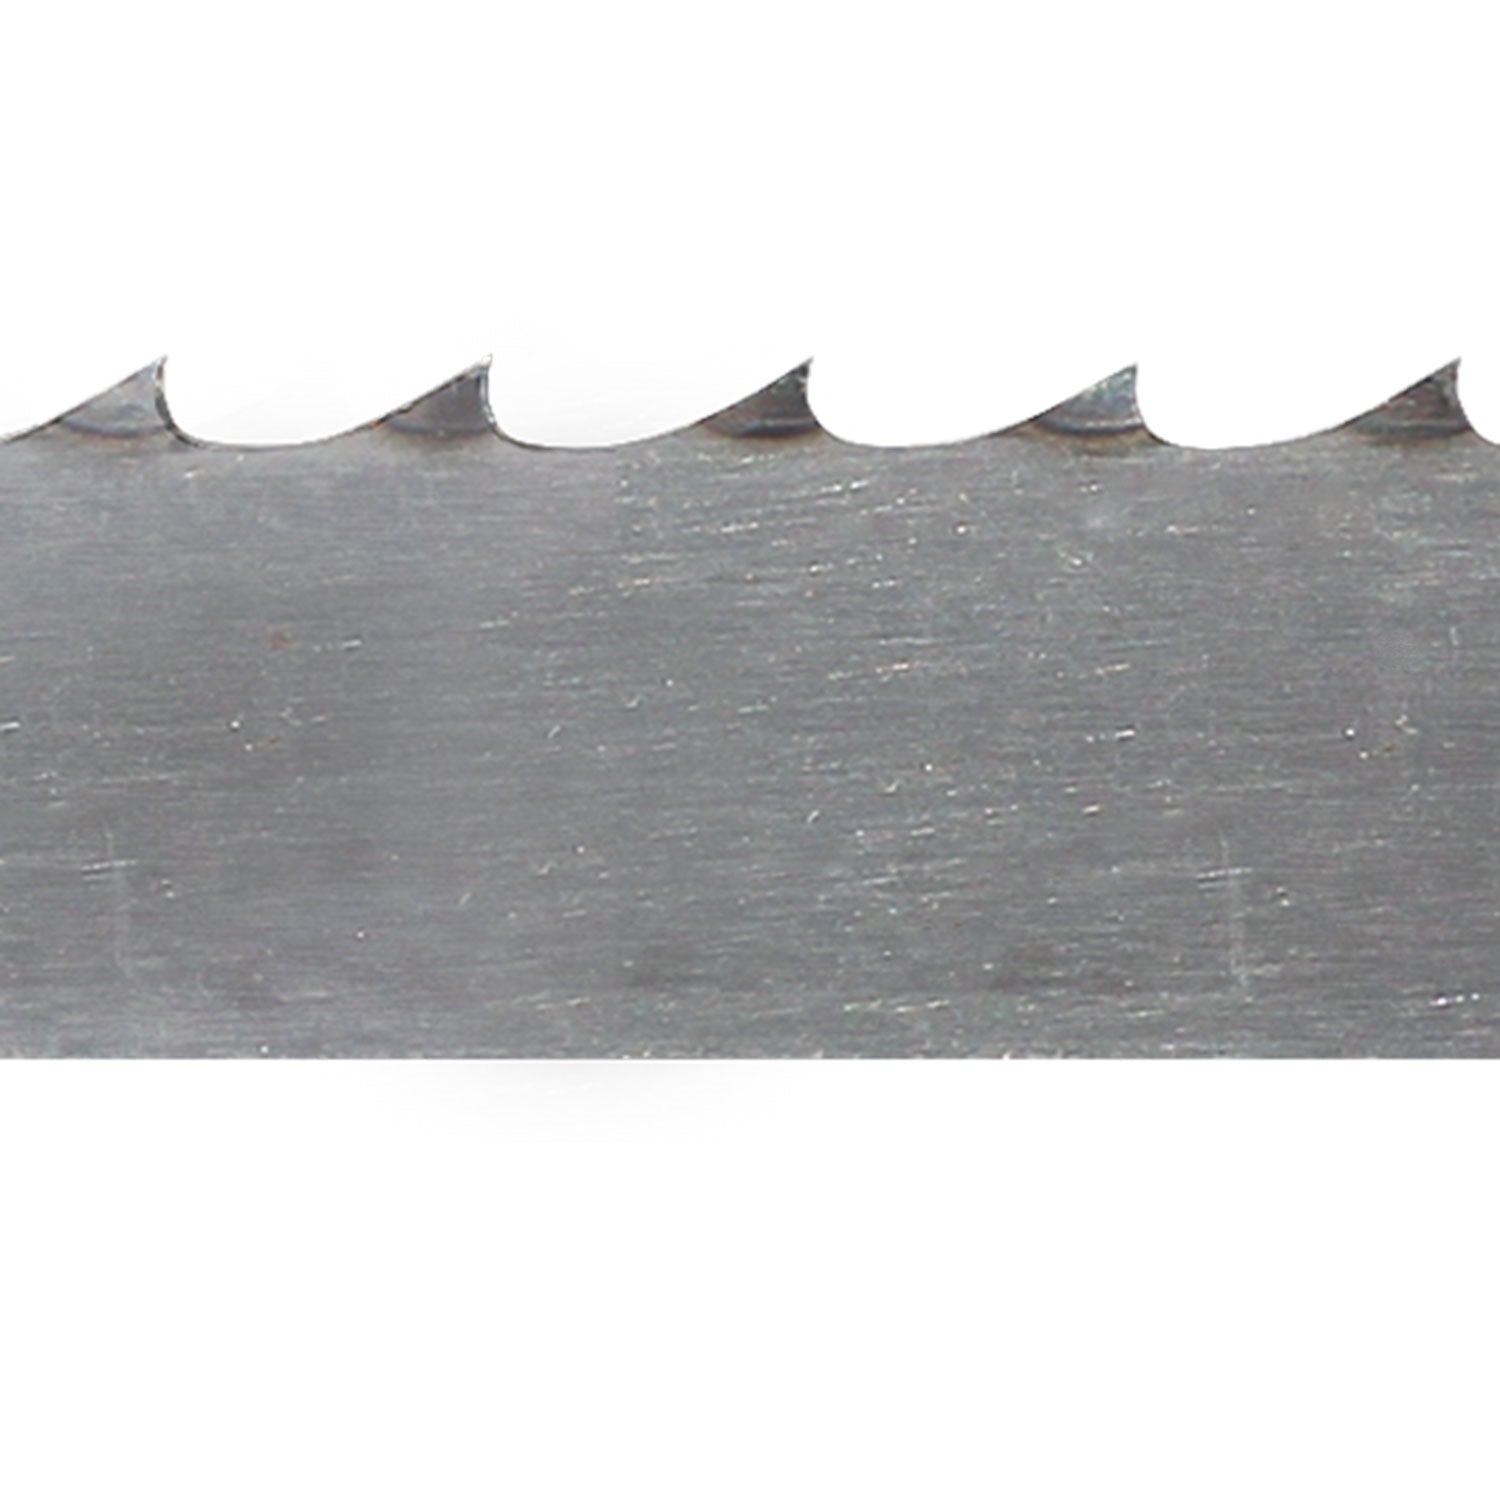 Meat Band Saw Blade - Stainless Steel - 124 in. x 5/8 in. x .022 in. x 3 TPI - Pack of 4